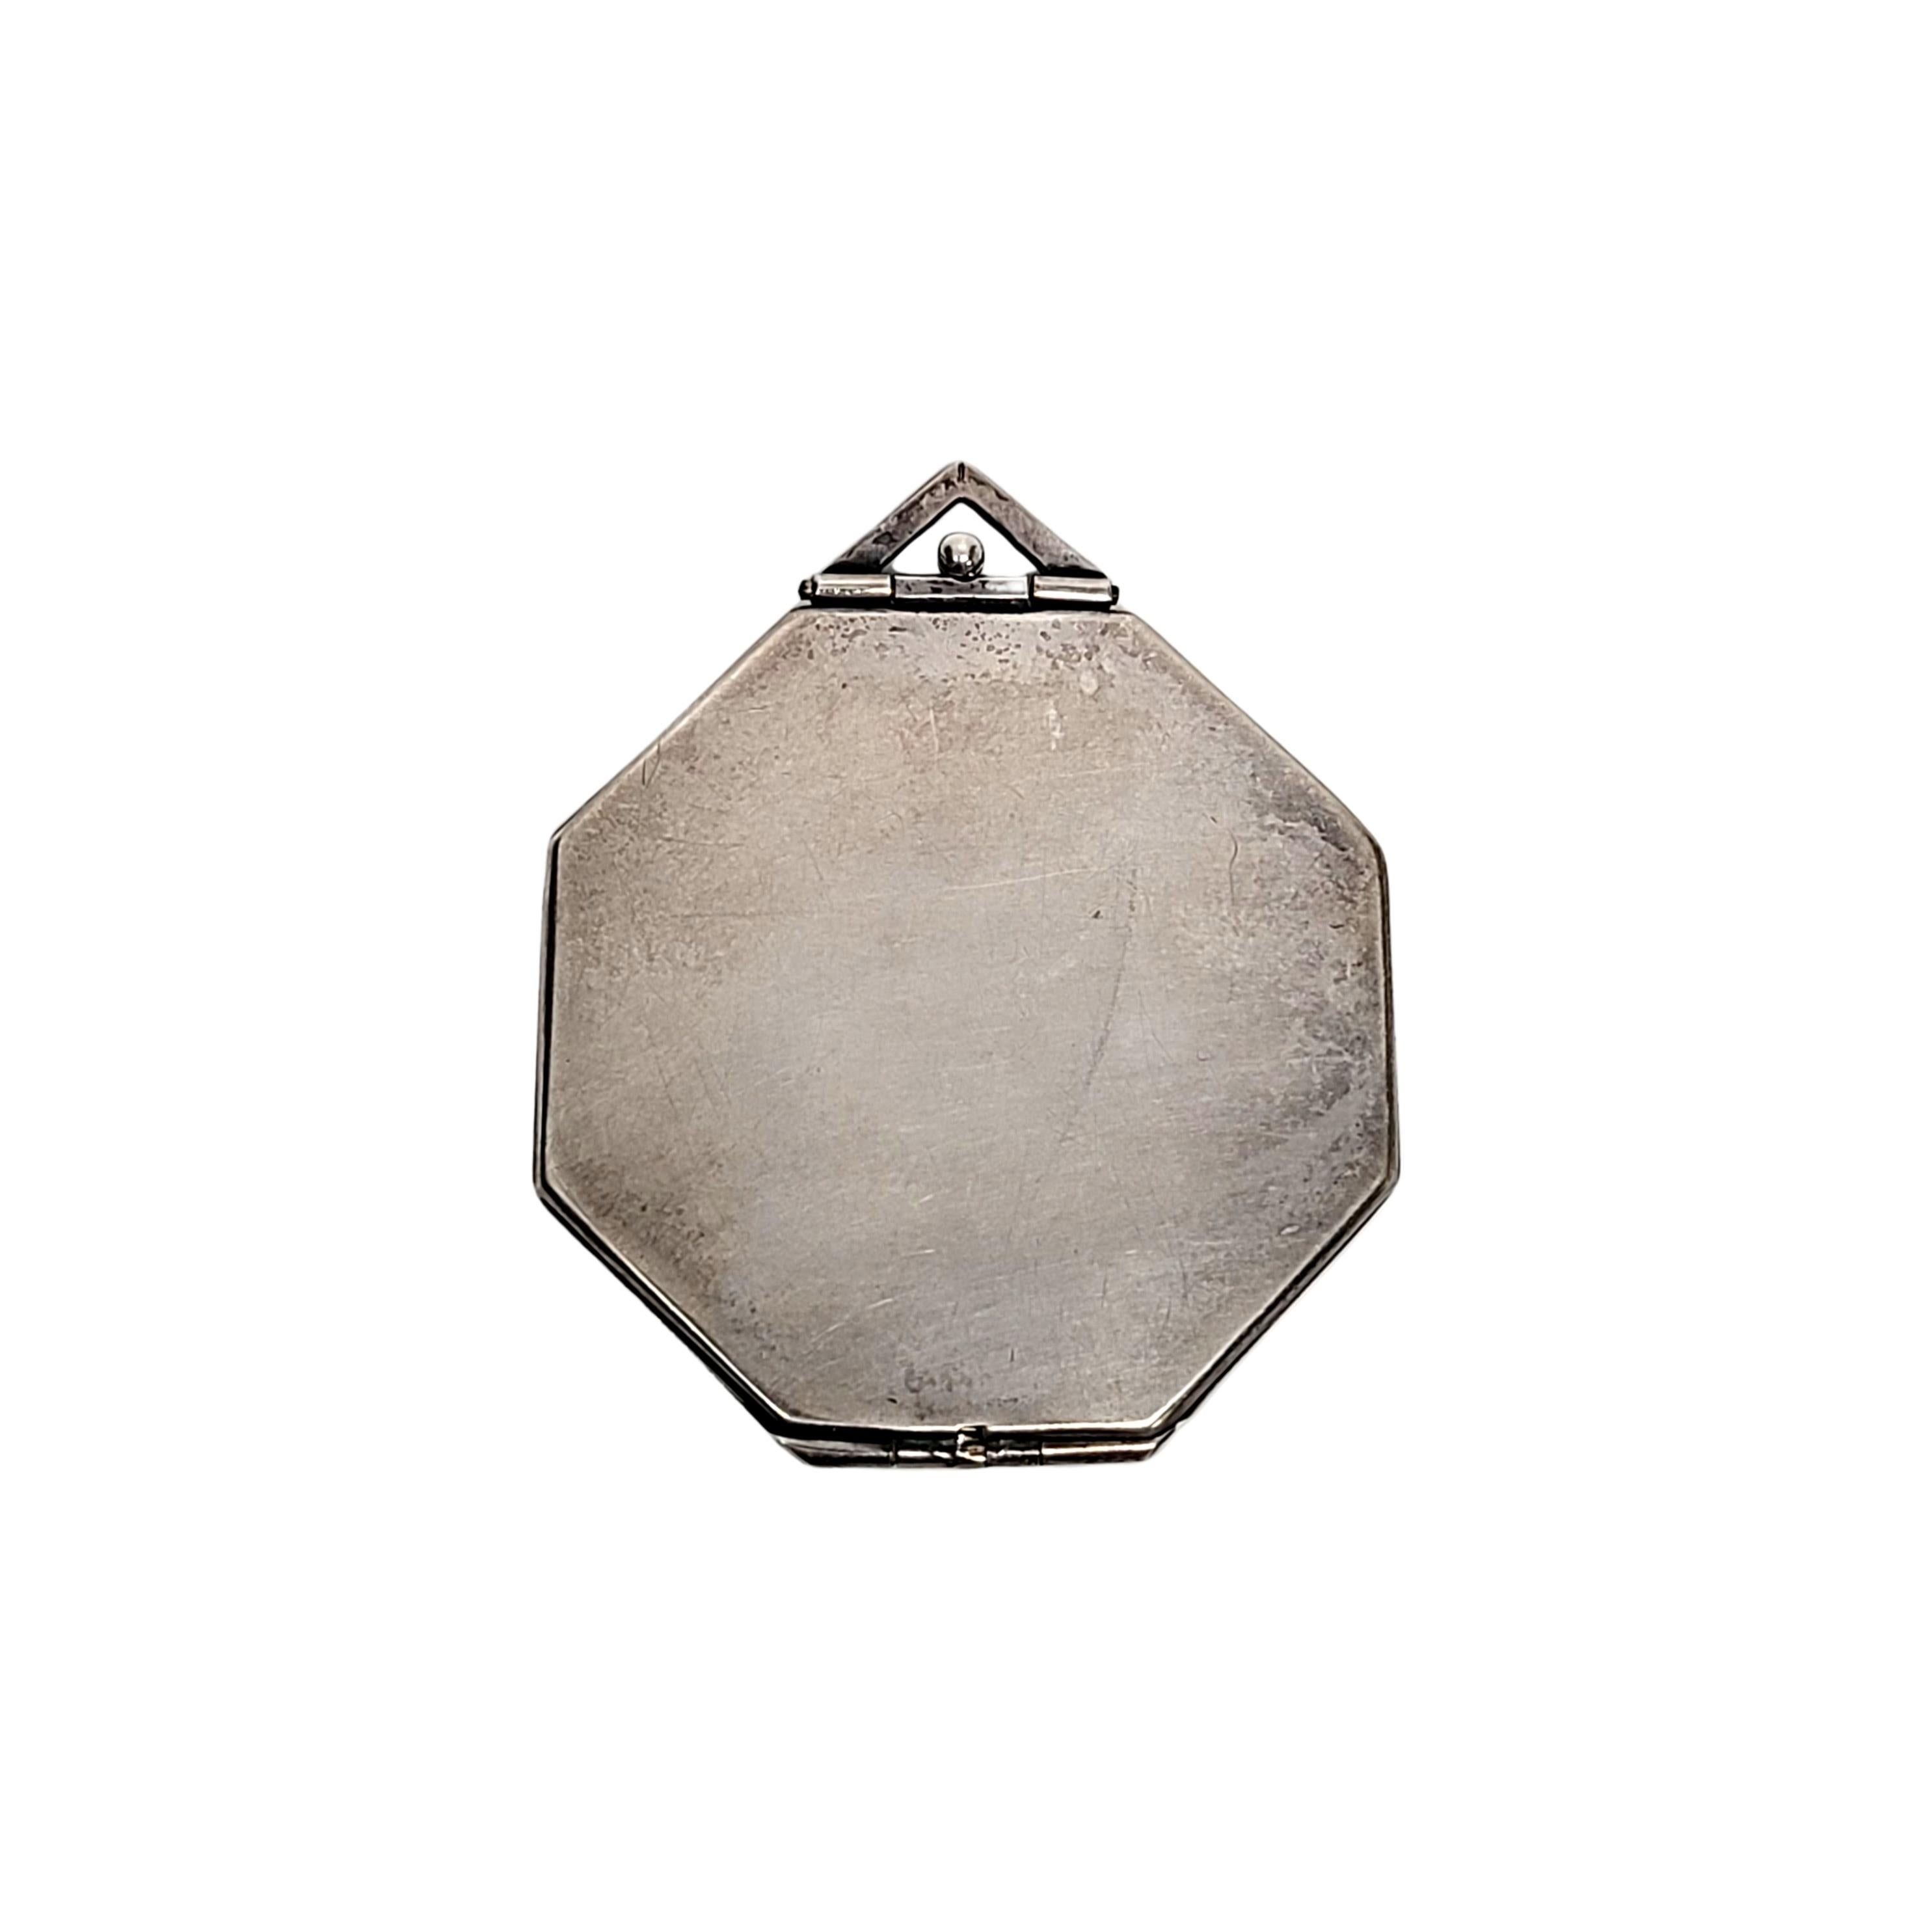 Octagon sterling silver locket pendant by Webster Co.

This beautiful sterling silver oval locket features a hammered finish with a smaller octagon cartouche at the center on the front, and a polished smooth back. Hinged bottom, opens from the